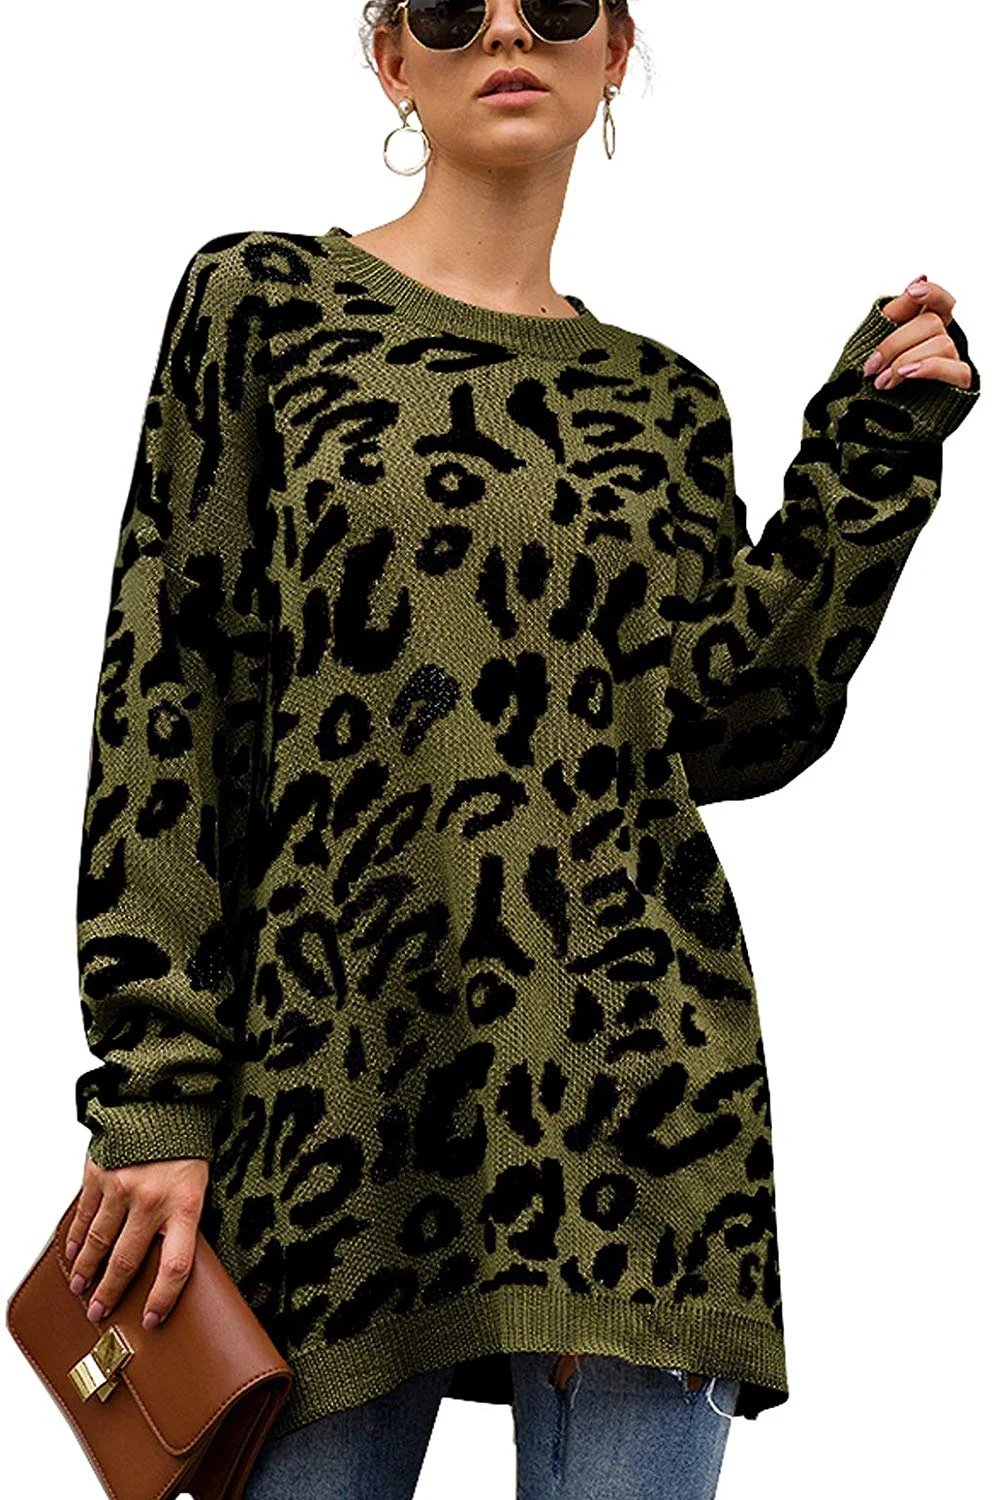 Pullover Sweaters Leopard Printed Oversize Knitted Crew Neck Sweater Long Sleeve Loose Jumper Sweatshirts Tops